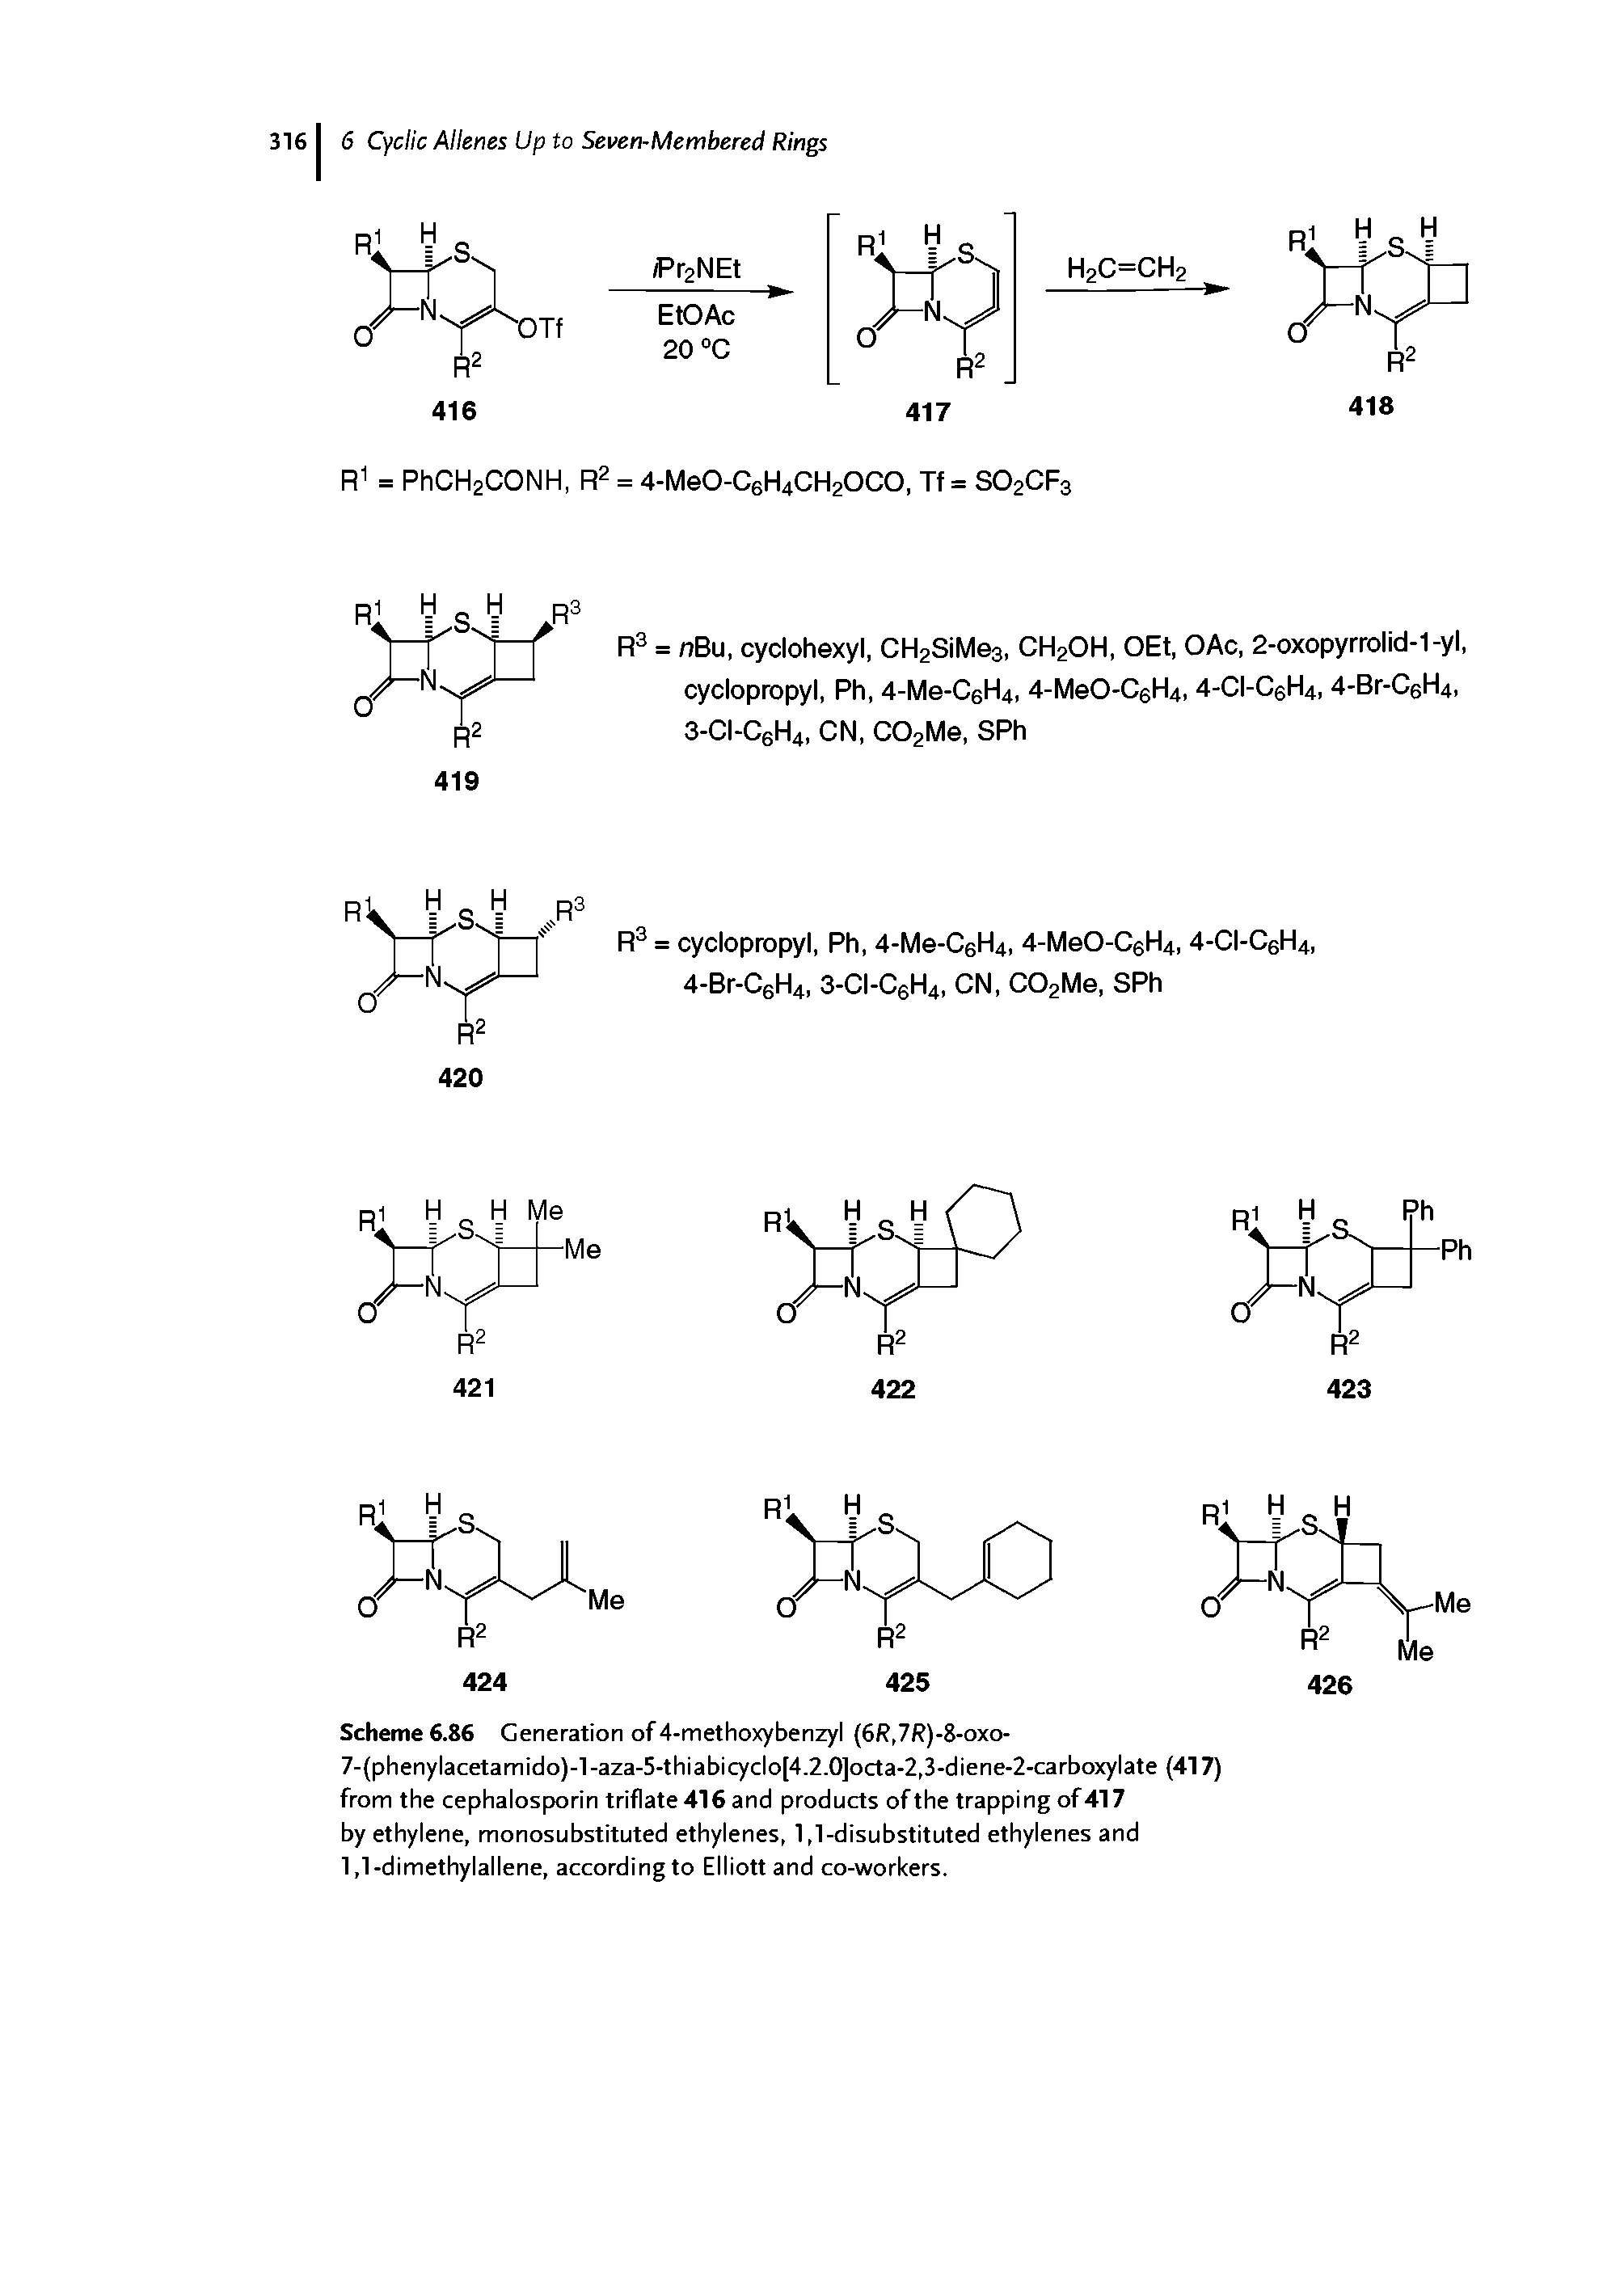 Scheme 6.86 Generation of 4-methoxybenzyl (6R,7R)-8-oxo-7-(phenylacetamido)-l-aza-5-thiabicyclo[4.2.0]octa-2,3-diene-2-carboxylate (417) from the cephalosporin triflate 416 and products of the trapping of 417 by ethylene, monosubstituted ethylenes, 1,1-disubstituted ethylenes and 1,1-dimethylallene, according to Elliott and co-workers.